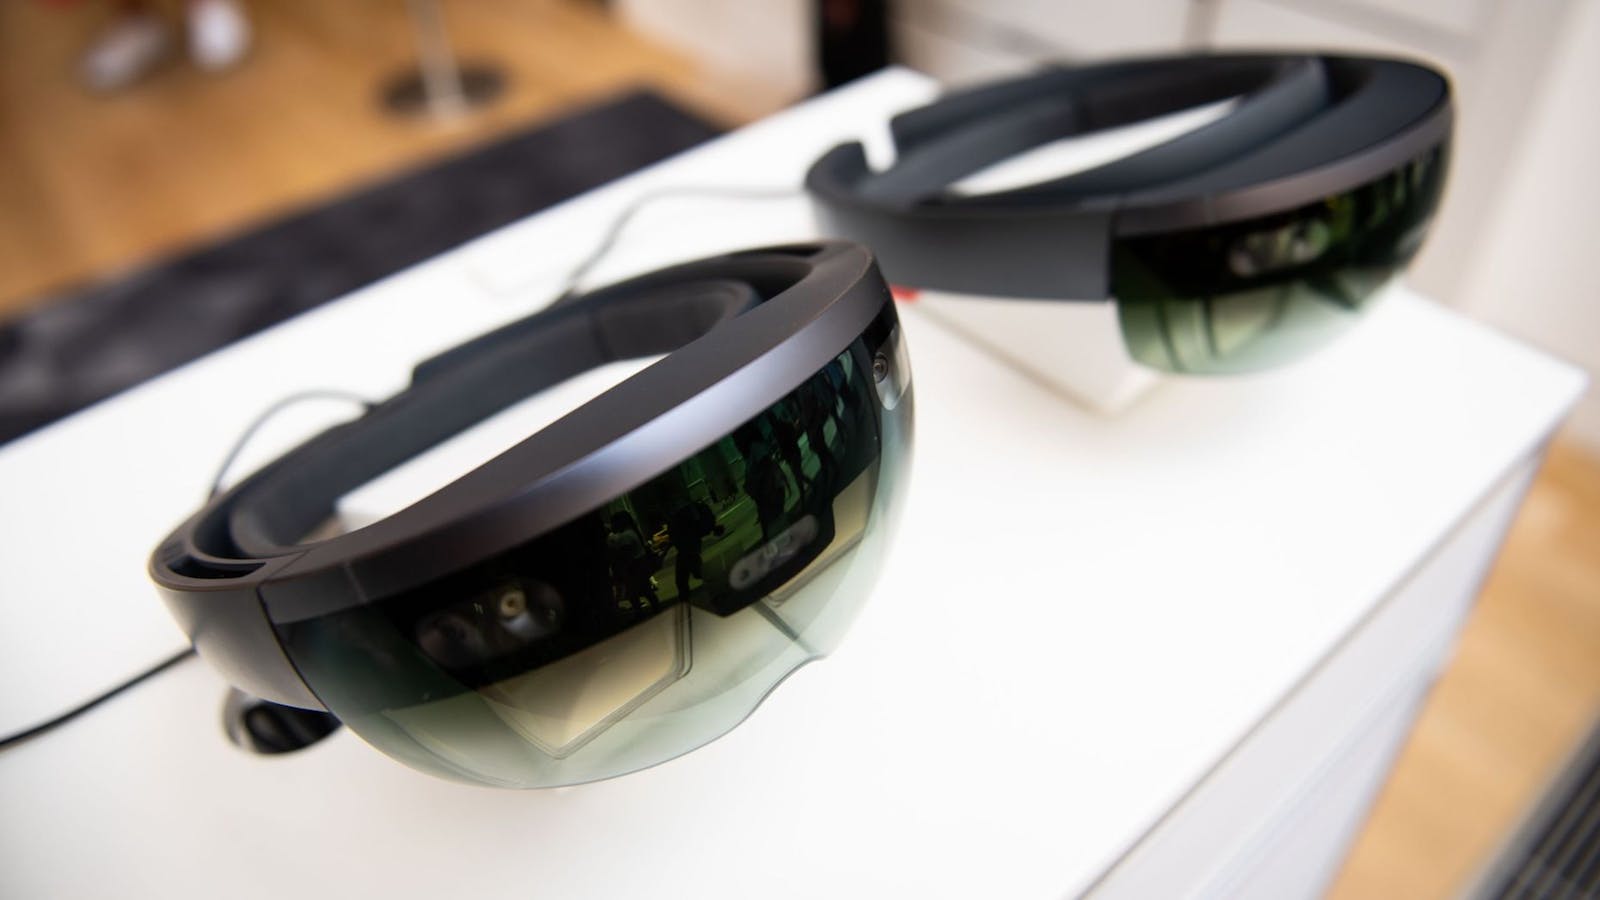 Original HoloLens devices at a Microsoft retail store. Photo: Bloomberg.